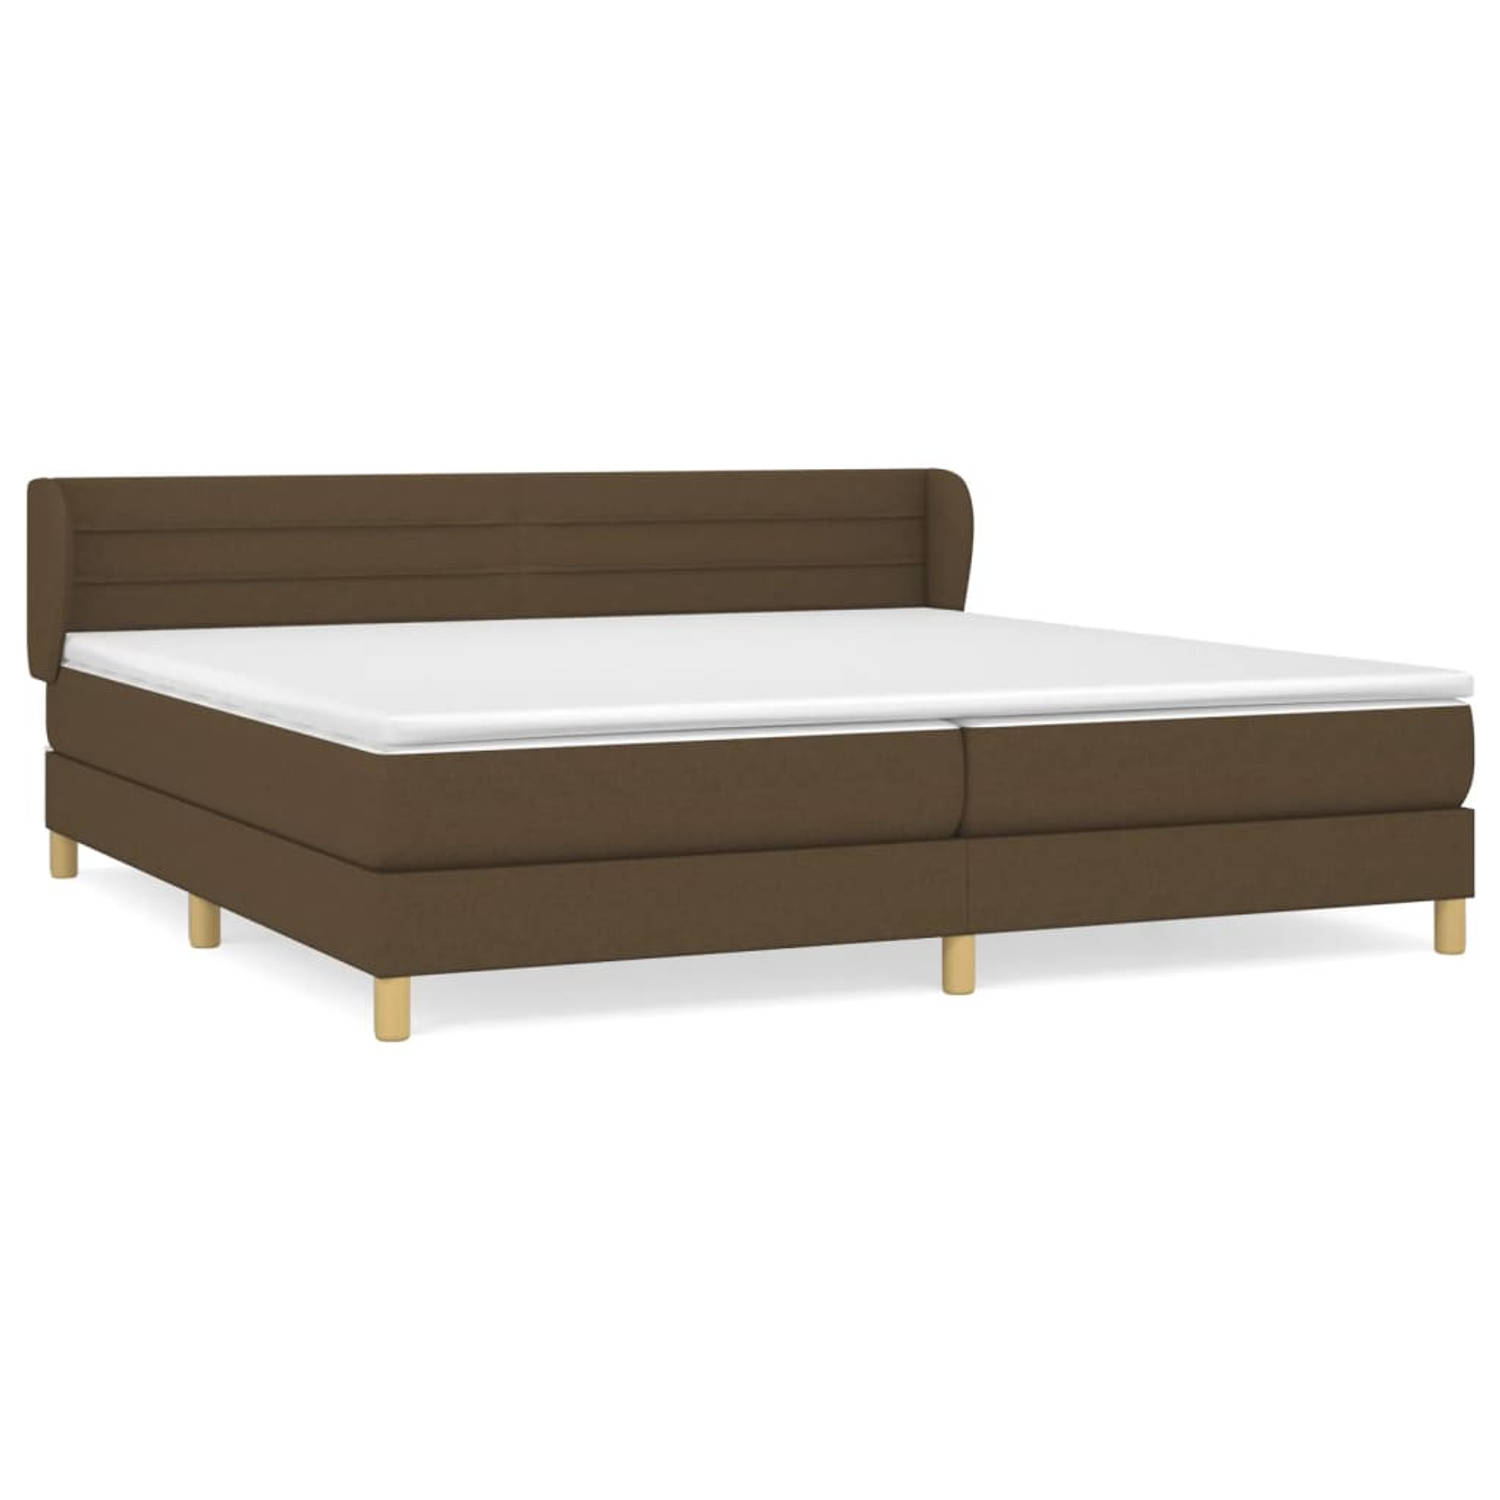 The Living Store Boxspringbed - Comfort - Bed - Afmeting- 203 x 203 x 78/88 cm - Ken- Duurzaam materiaal